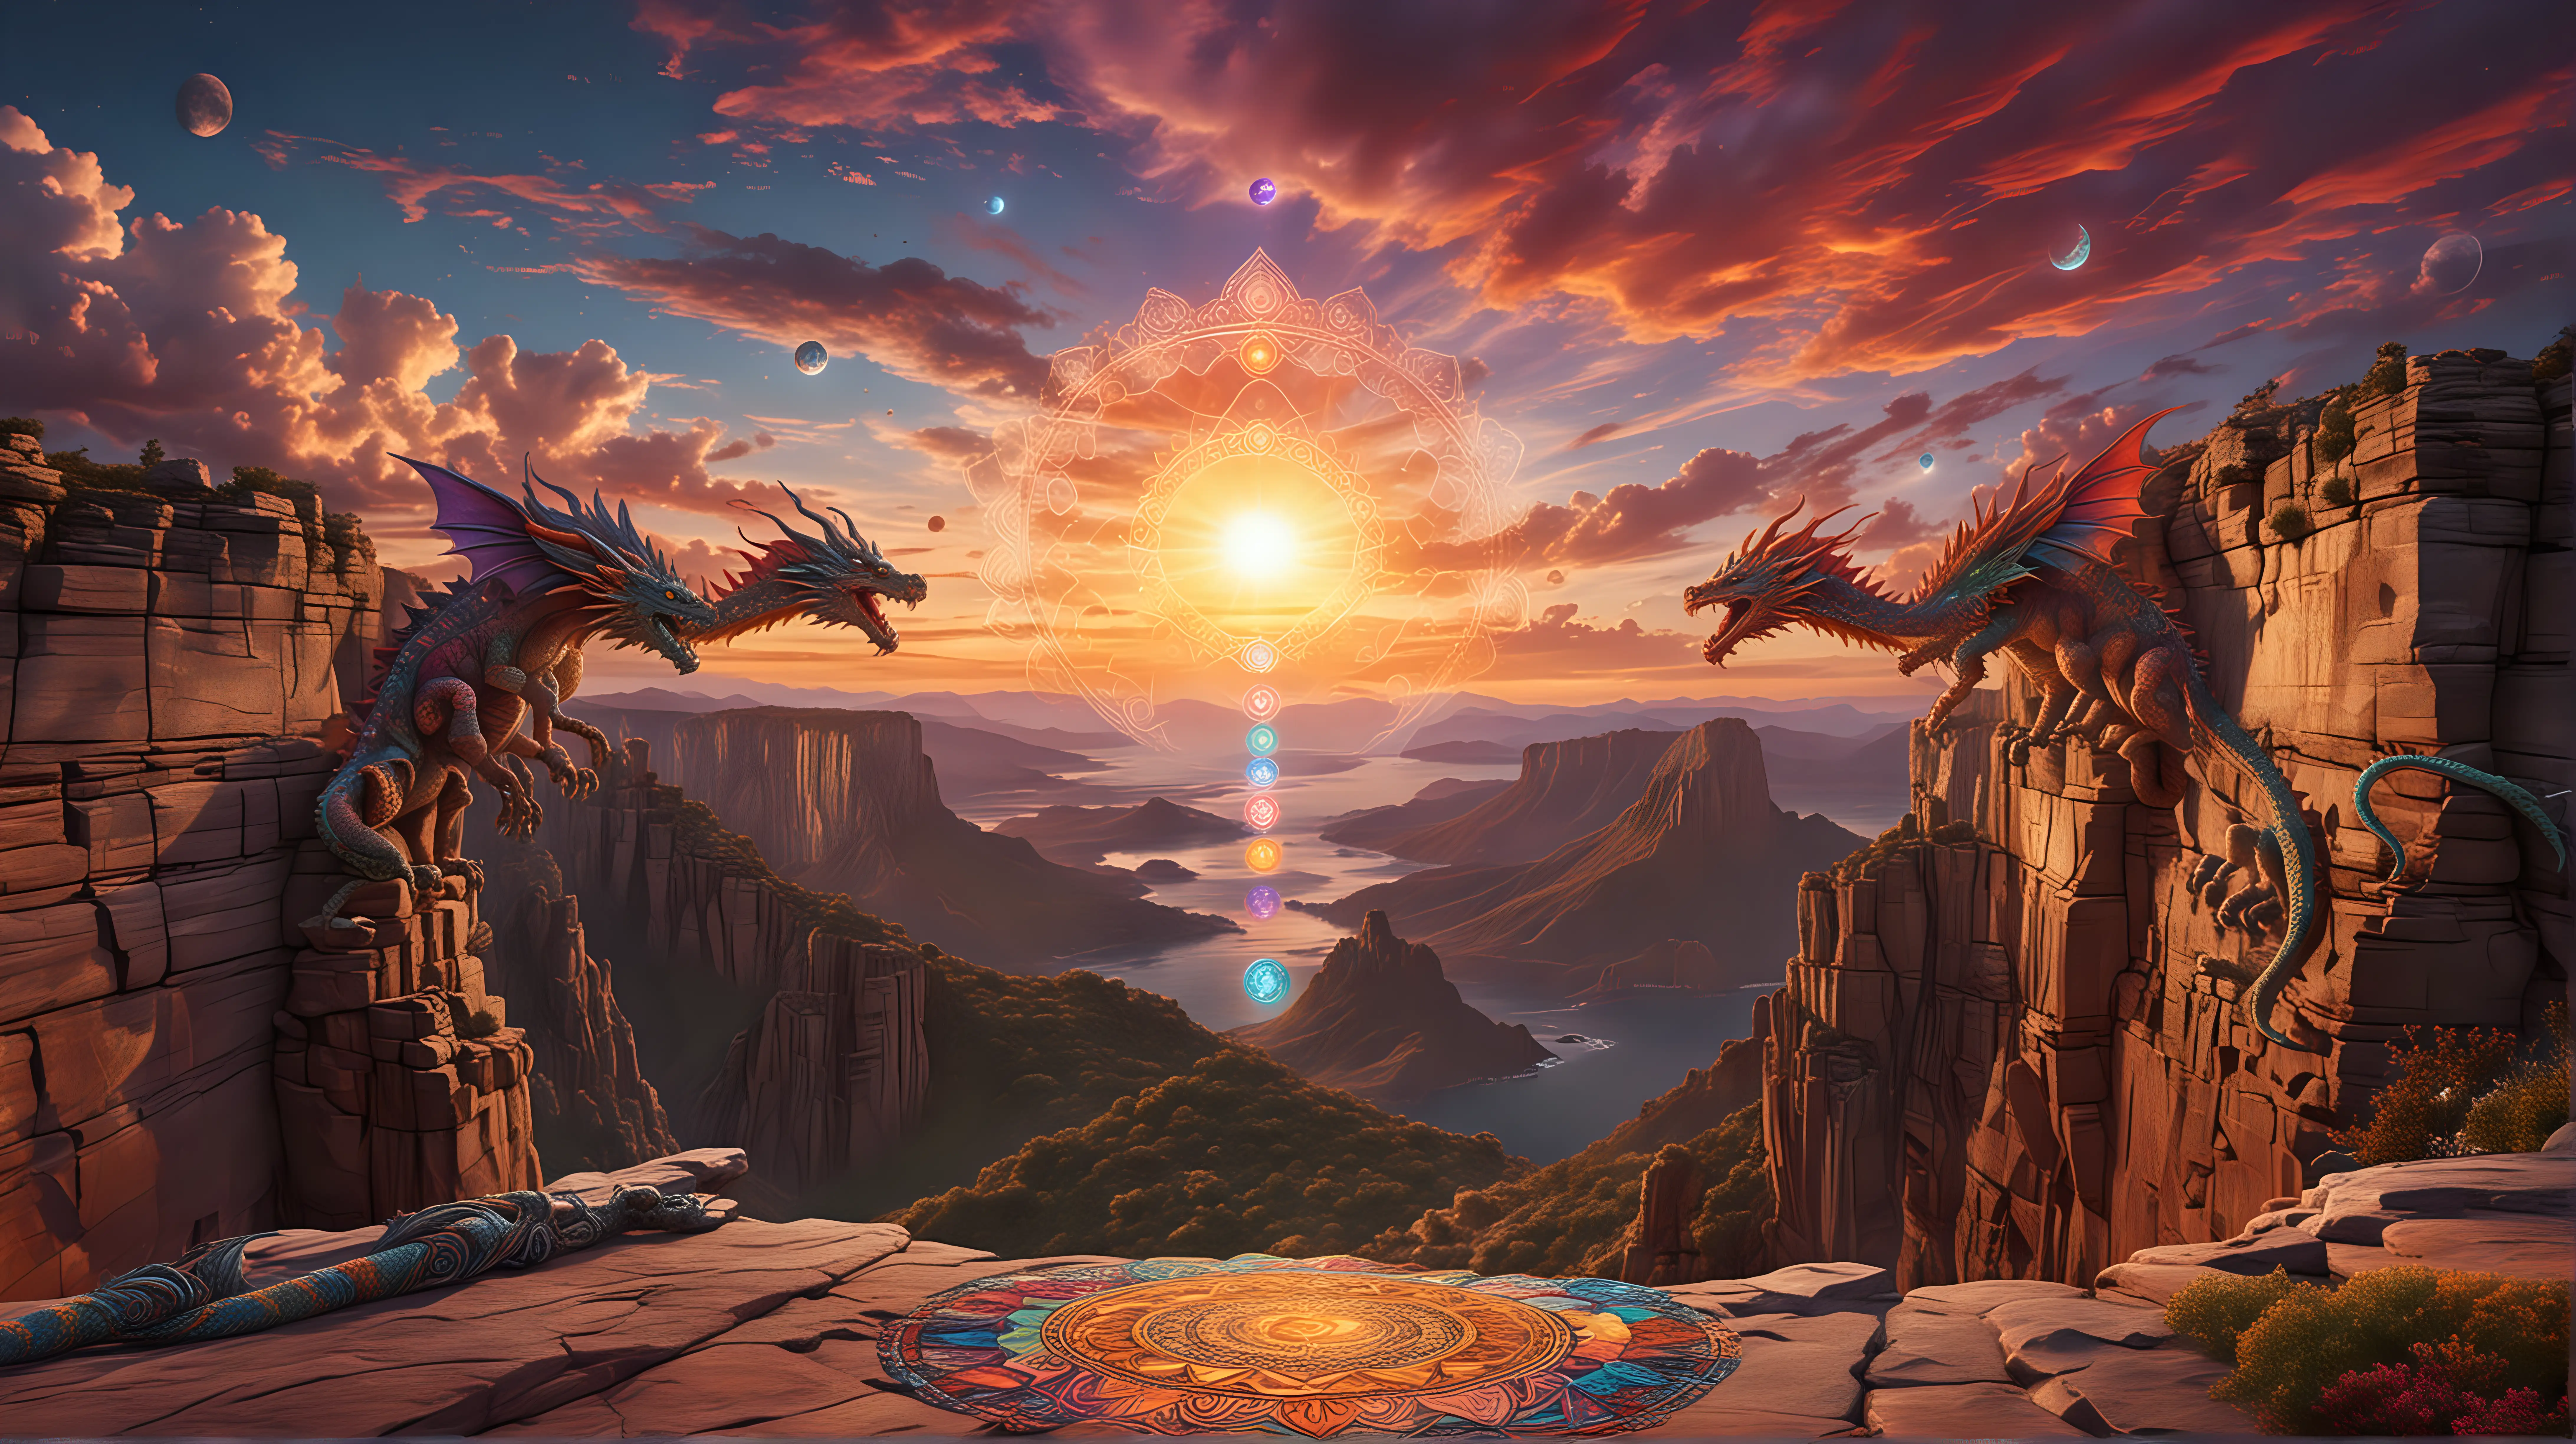 Psychedelic DMT visual on top of a scenic cliff on the edge of the universe at sunset with both the sun and moon visible. The clouds are shaped like dragons and there's 7 glowing chakra mandalas in the sky